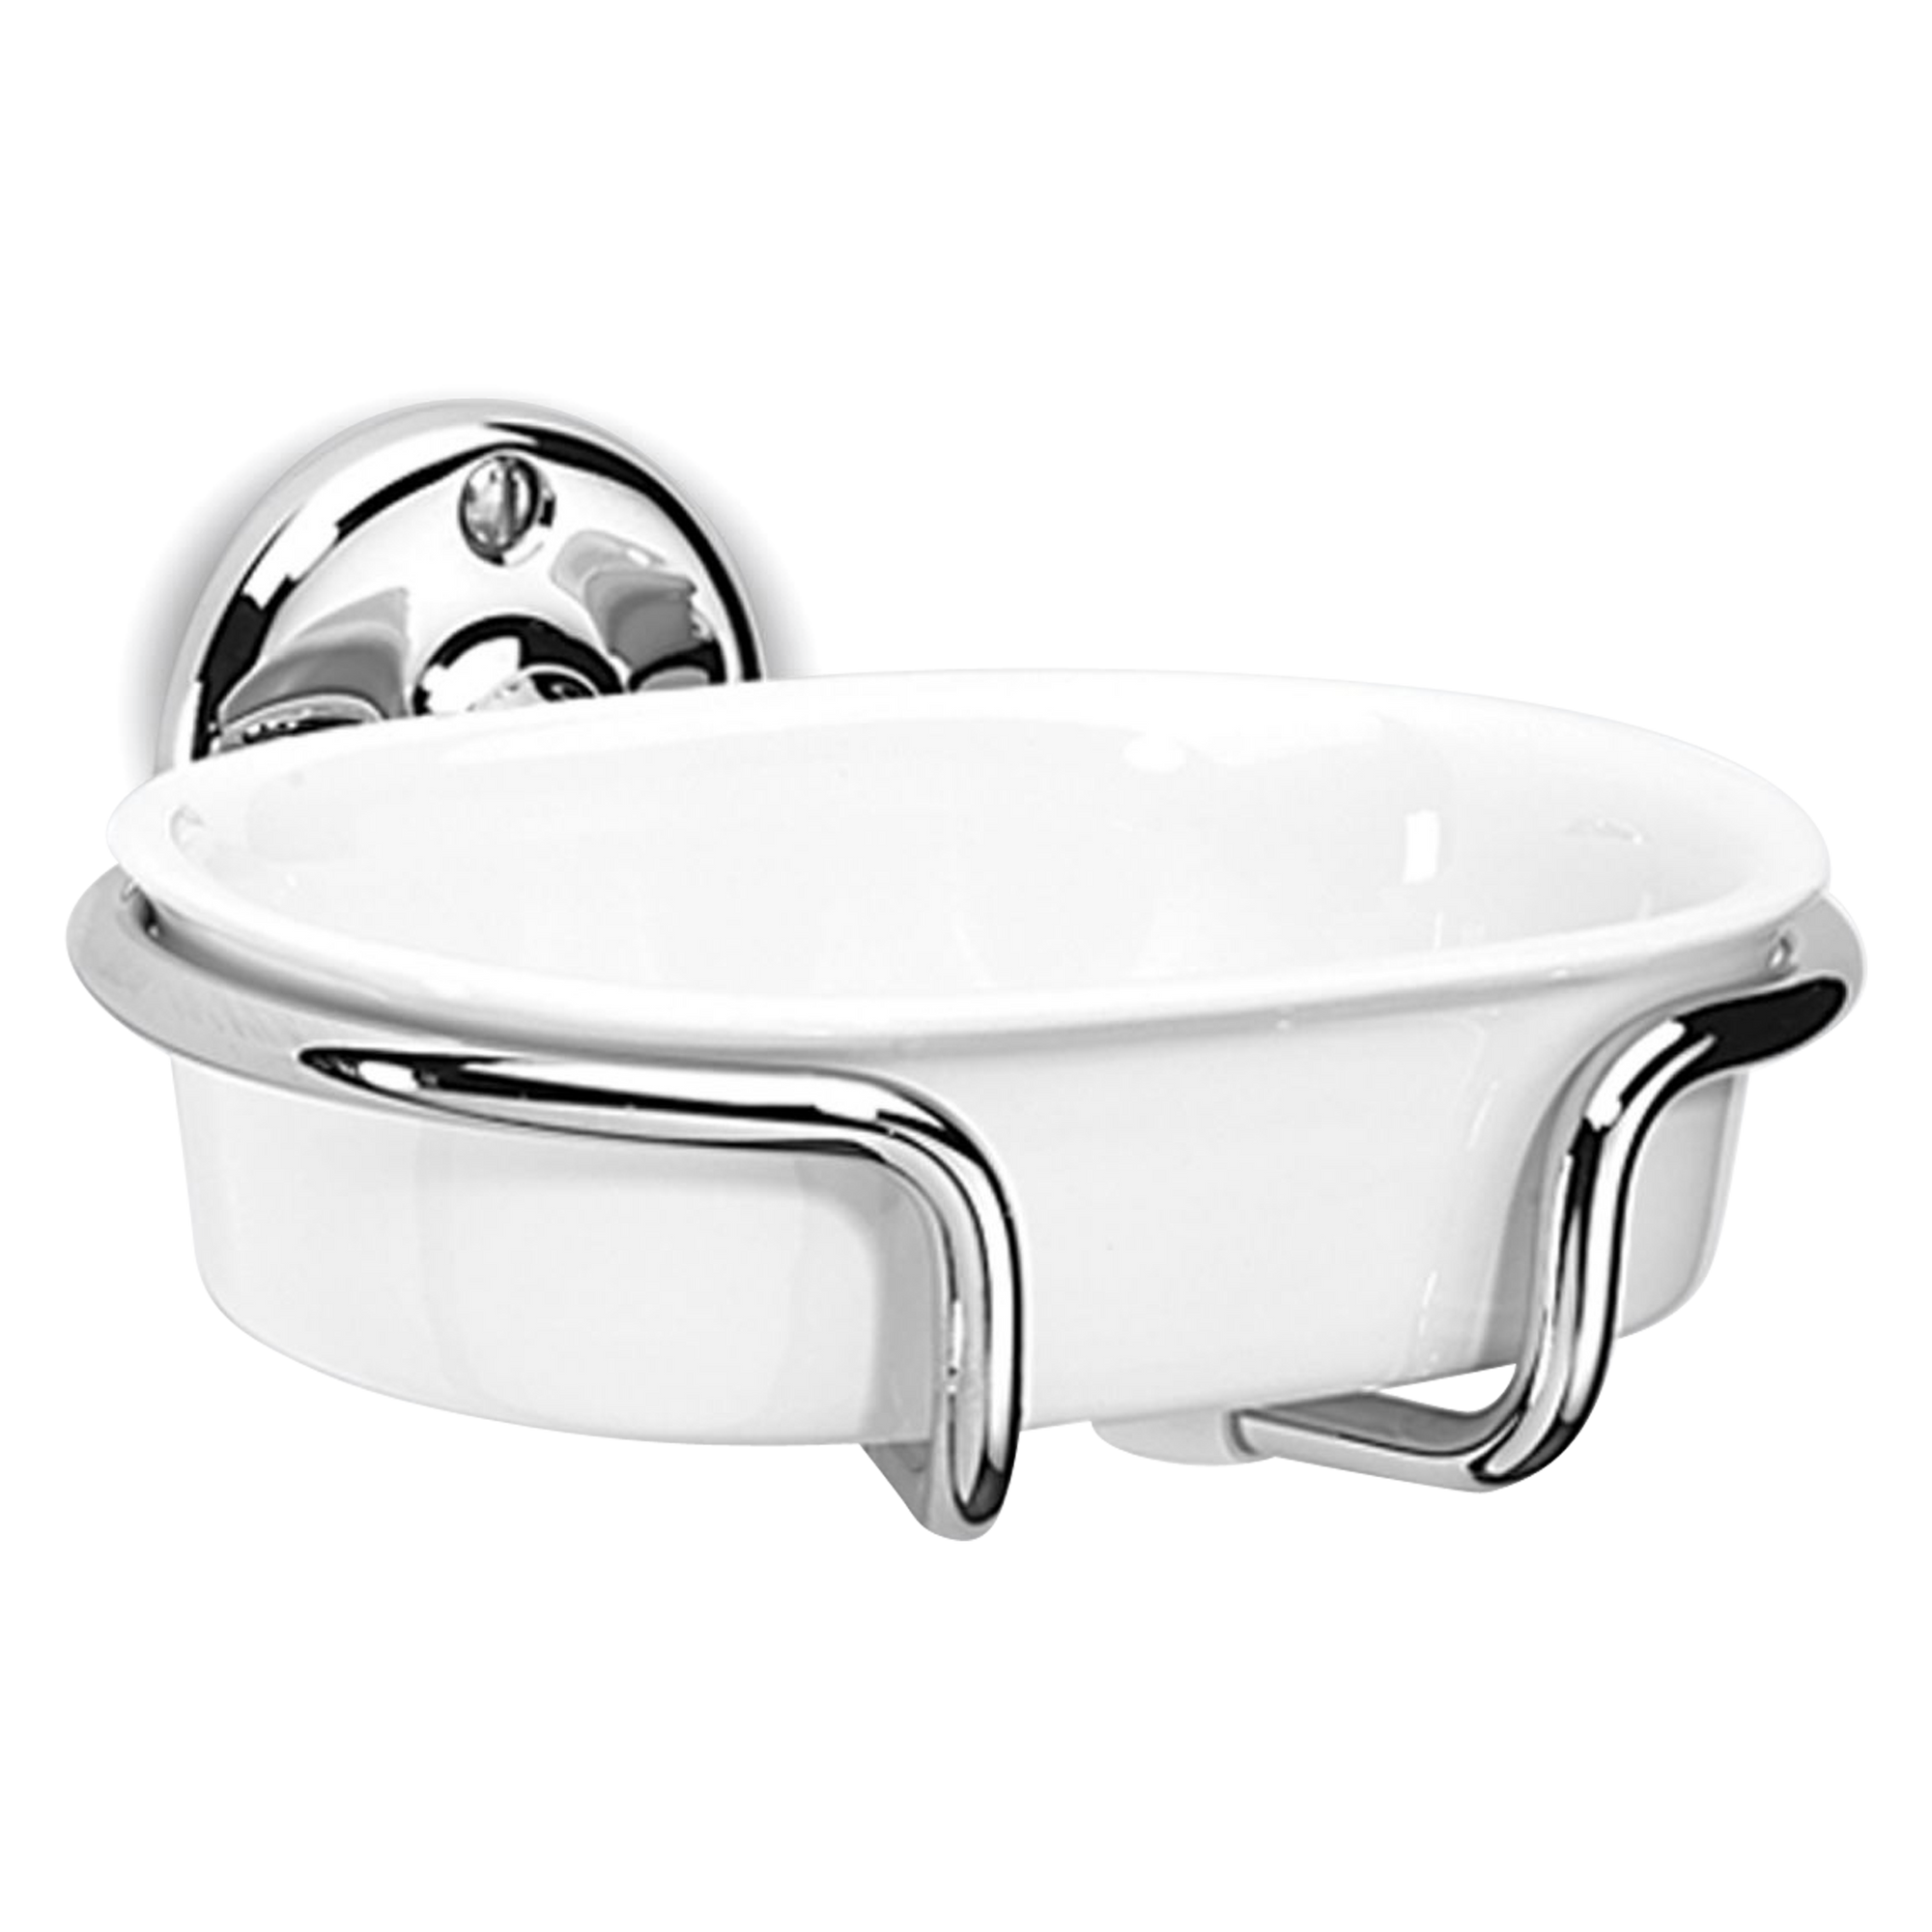 The Novis Soap Dish features beautiful details for a modern or traditional décor.